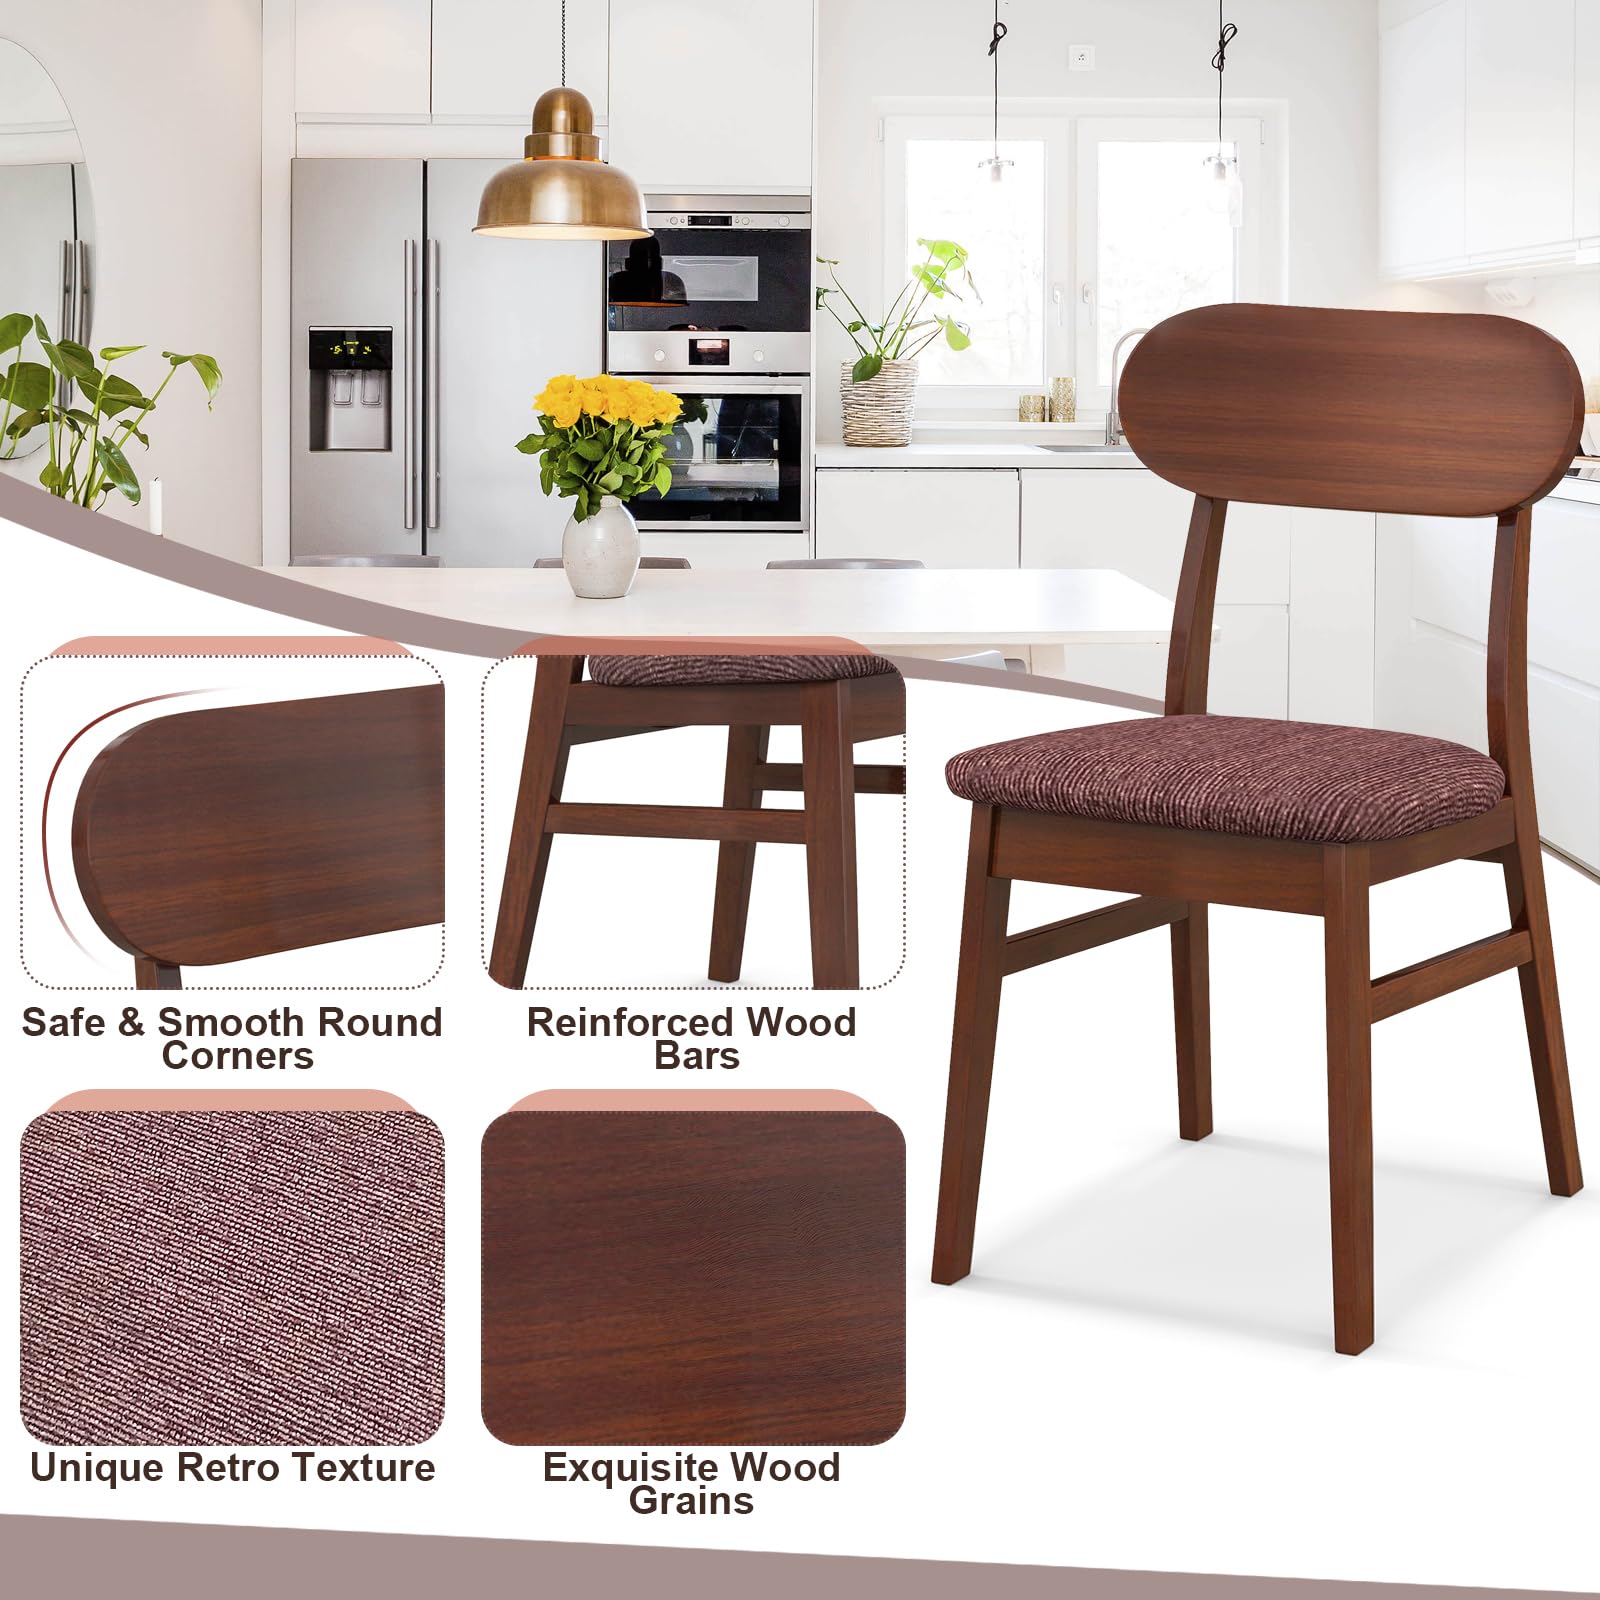 Giantex Wooden Dining Chairs Set of 2 or 4 Walnut, Farmhouse Kitchen Chairs with Padded Seat